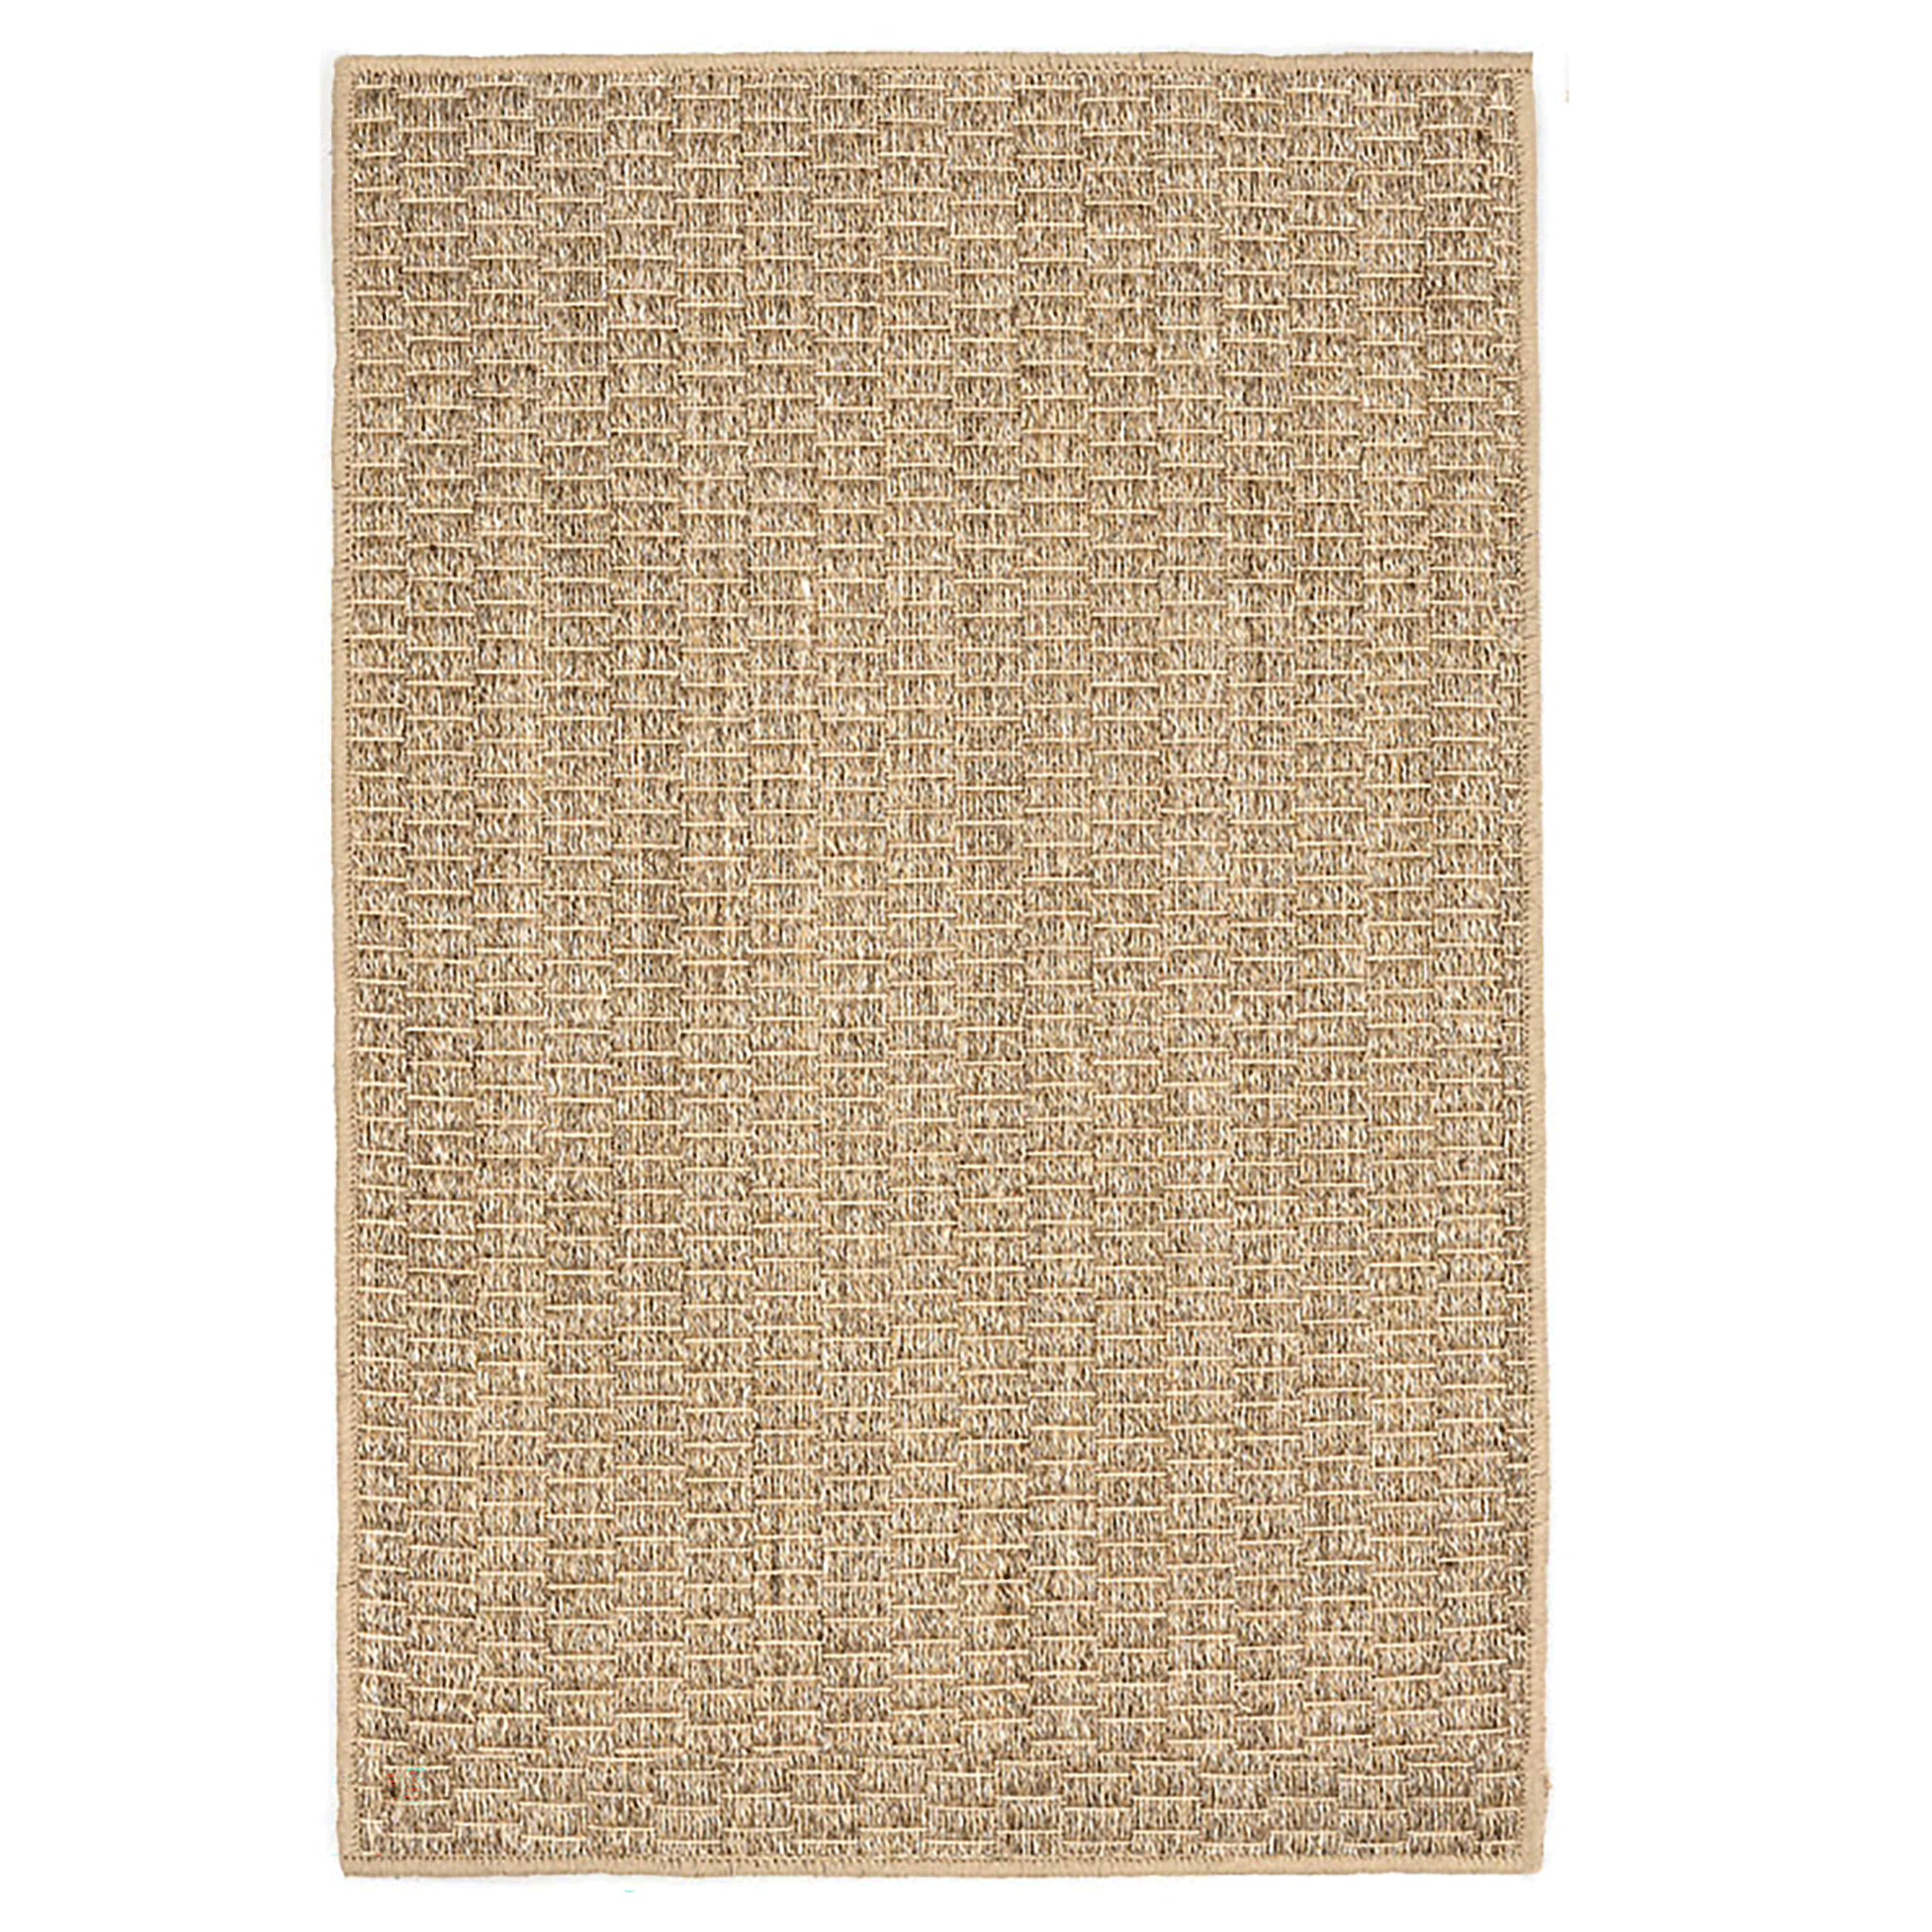 Maine Cottage Wicker Natural Woven Sisal Rug | Maine Cottage¨ 